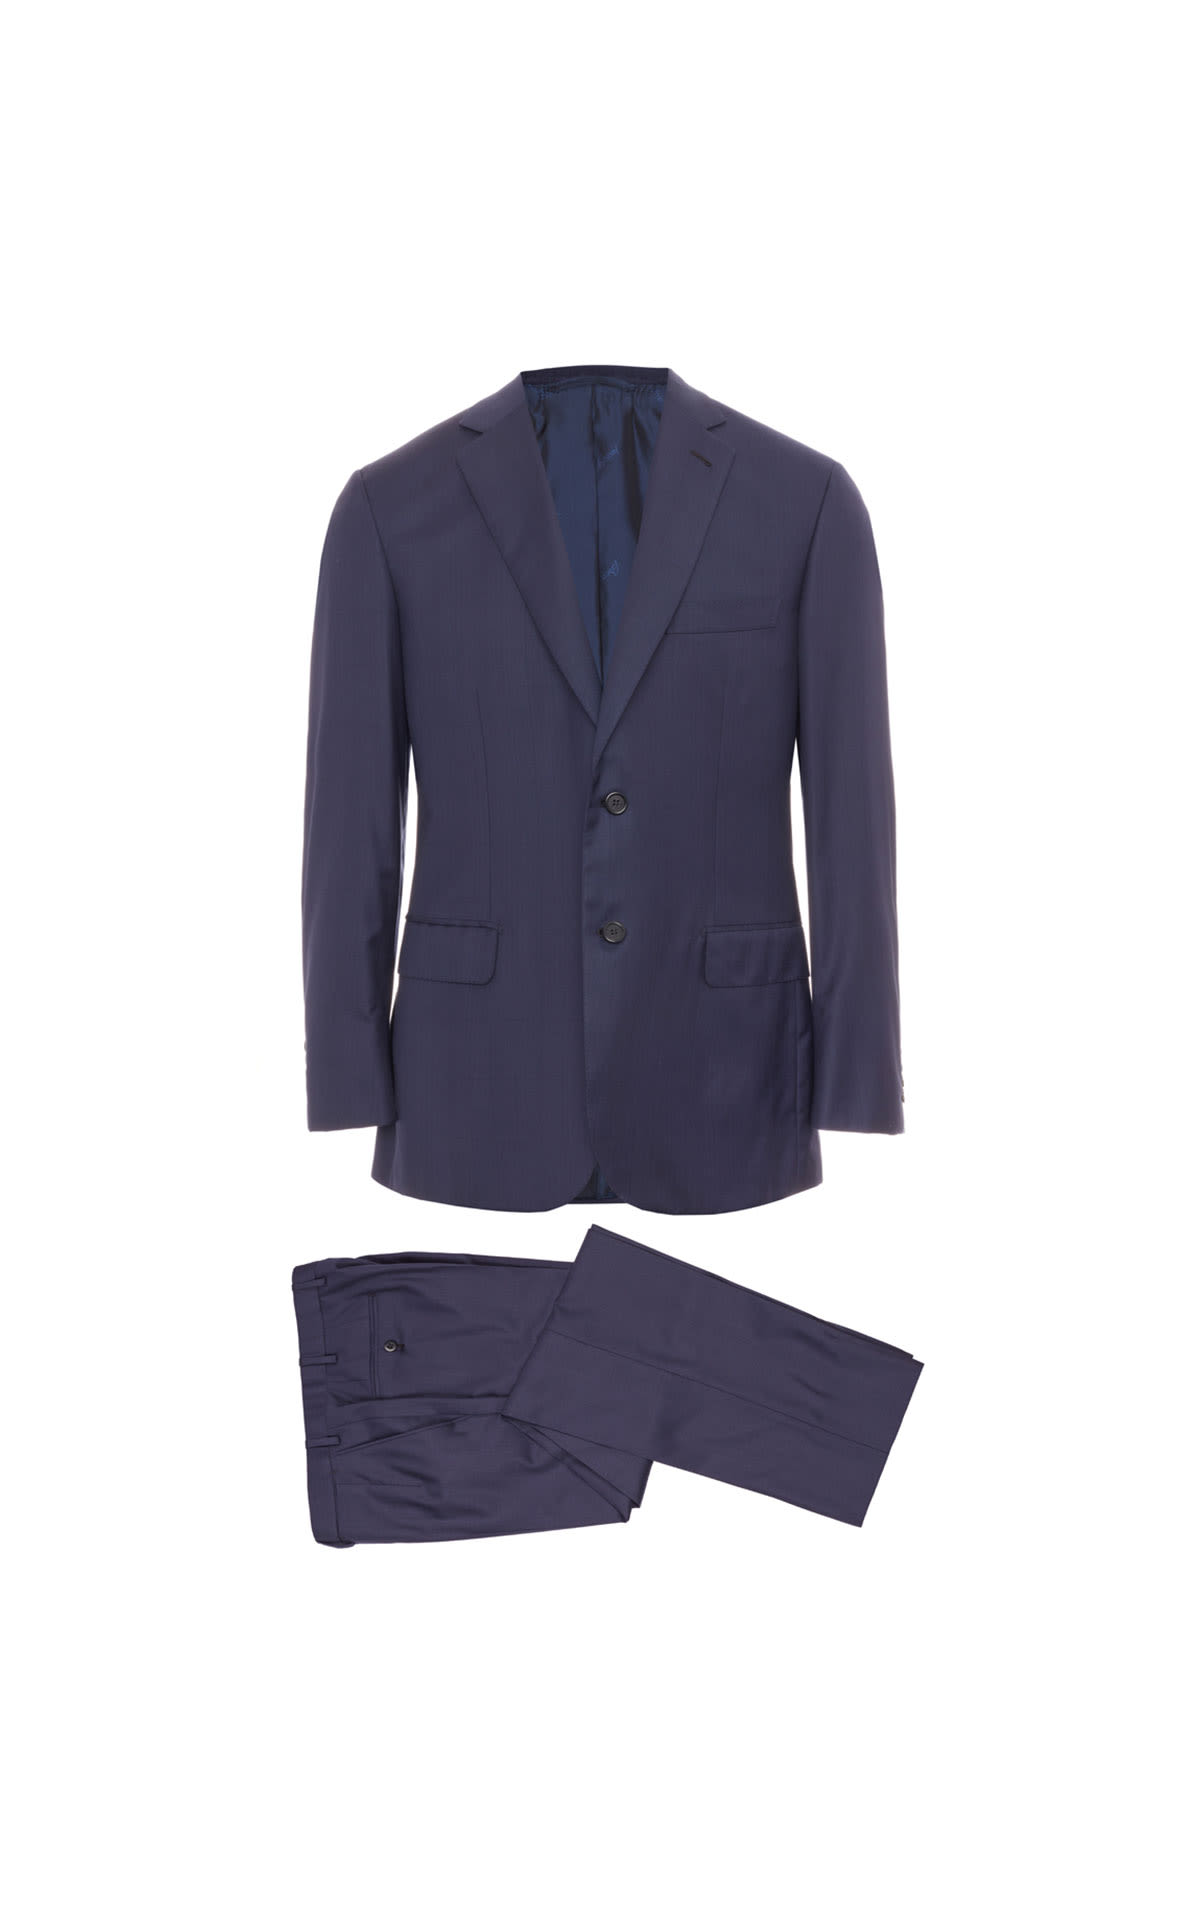 Brioni Suits brunico from Bicester Village